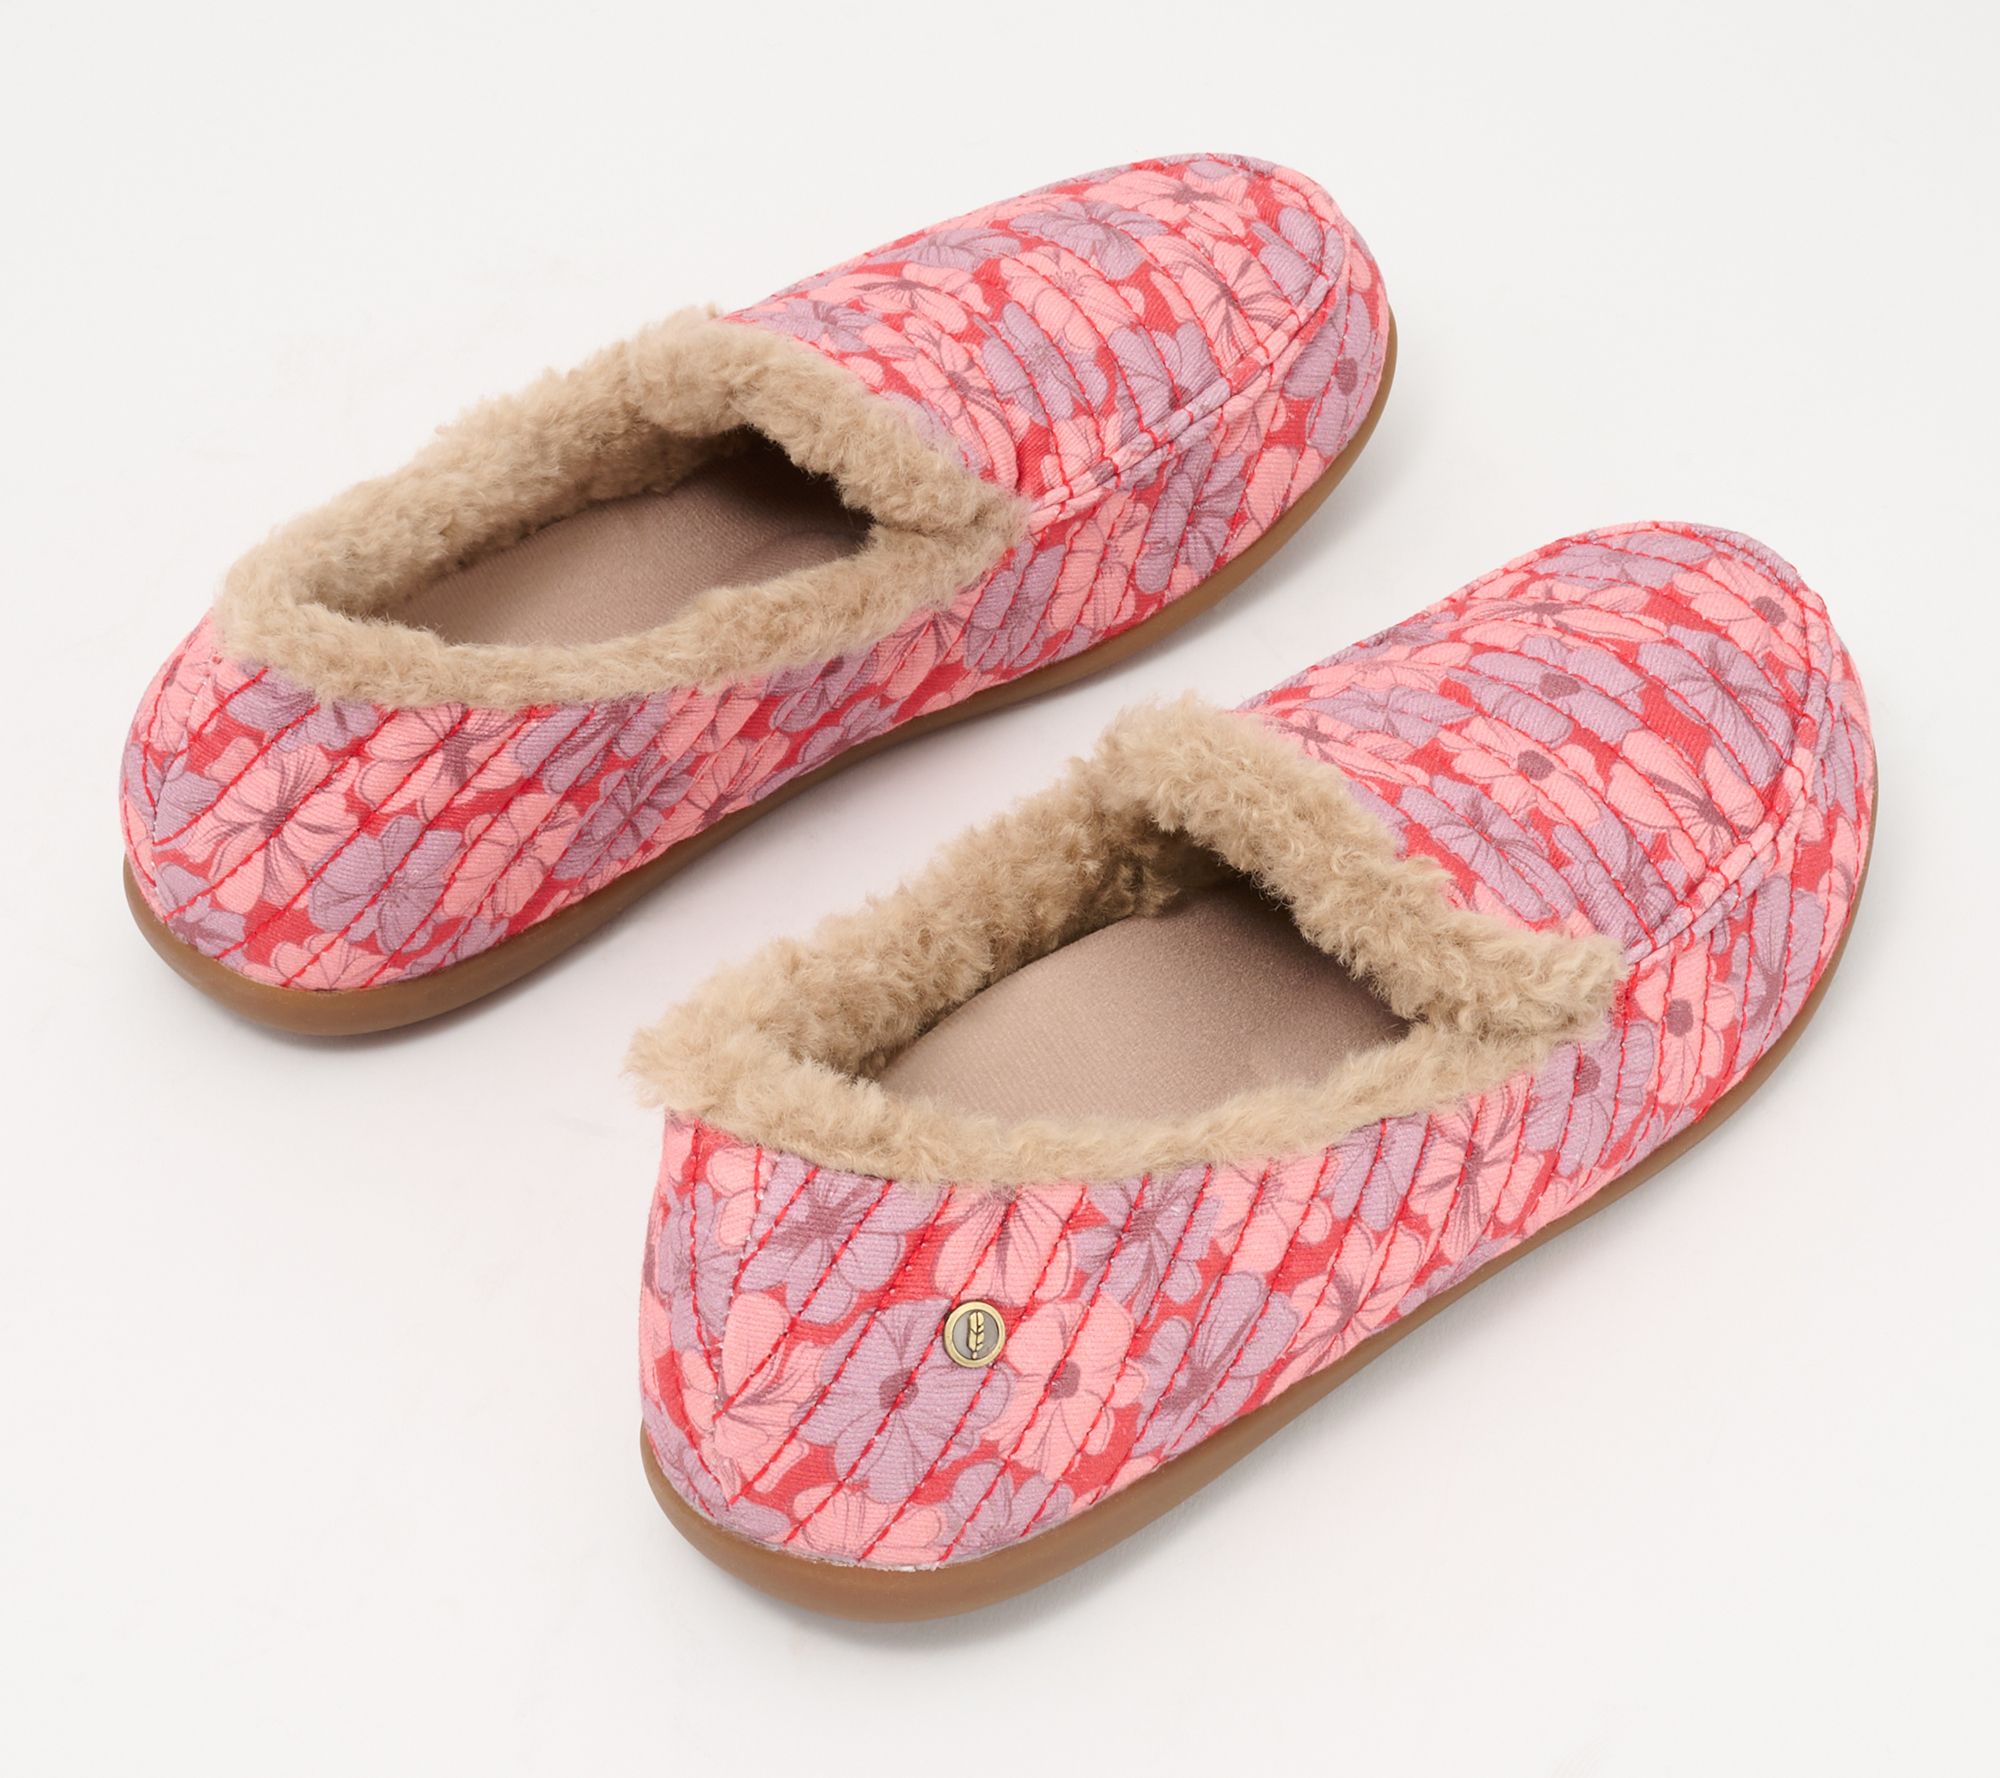 Revitalign Orthotic Quilted Floral Slippers - Cedar - QVC.com